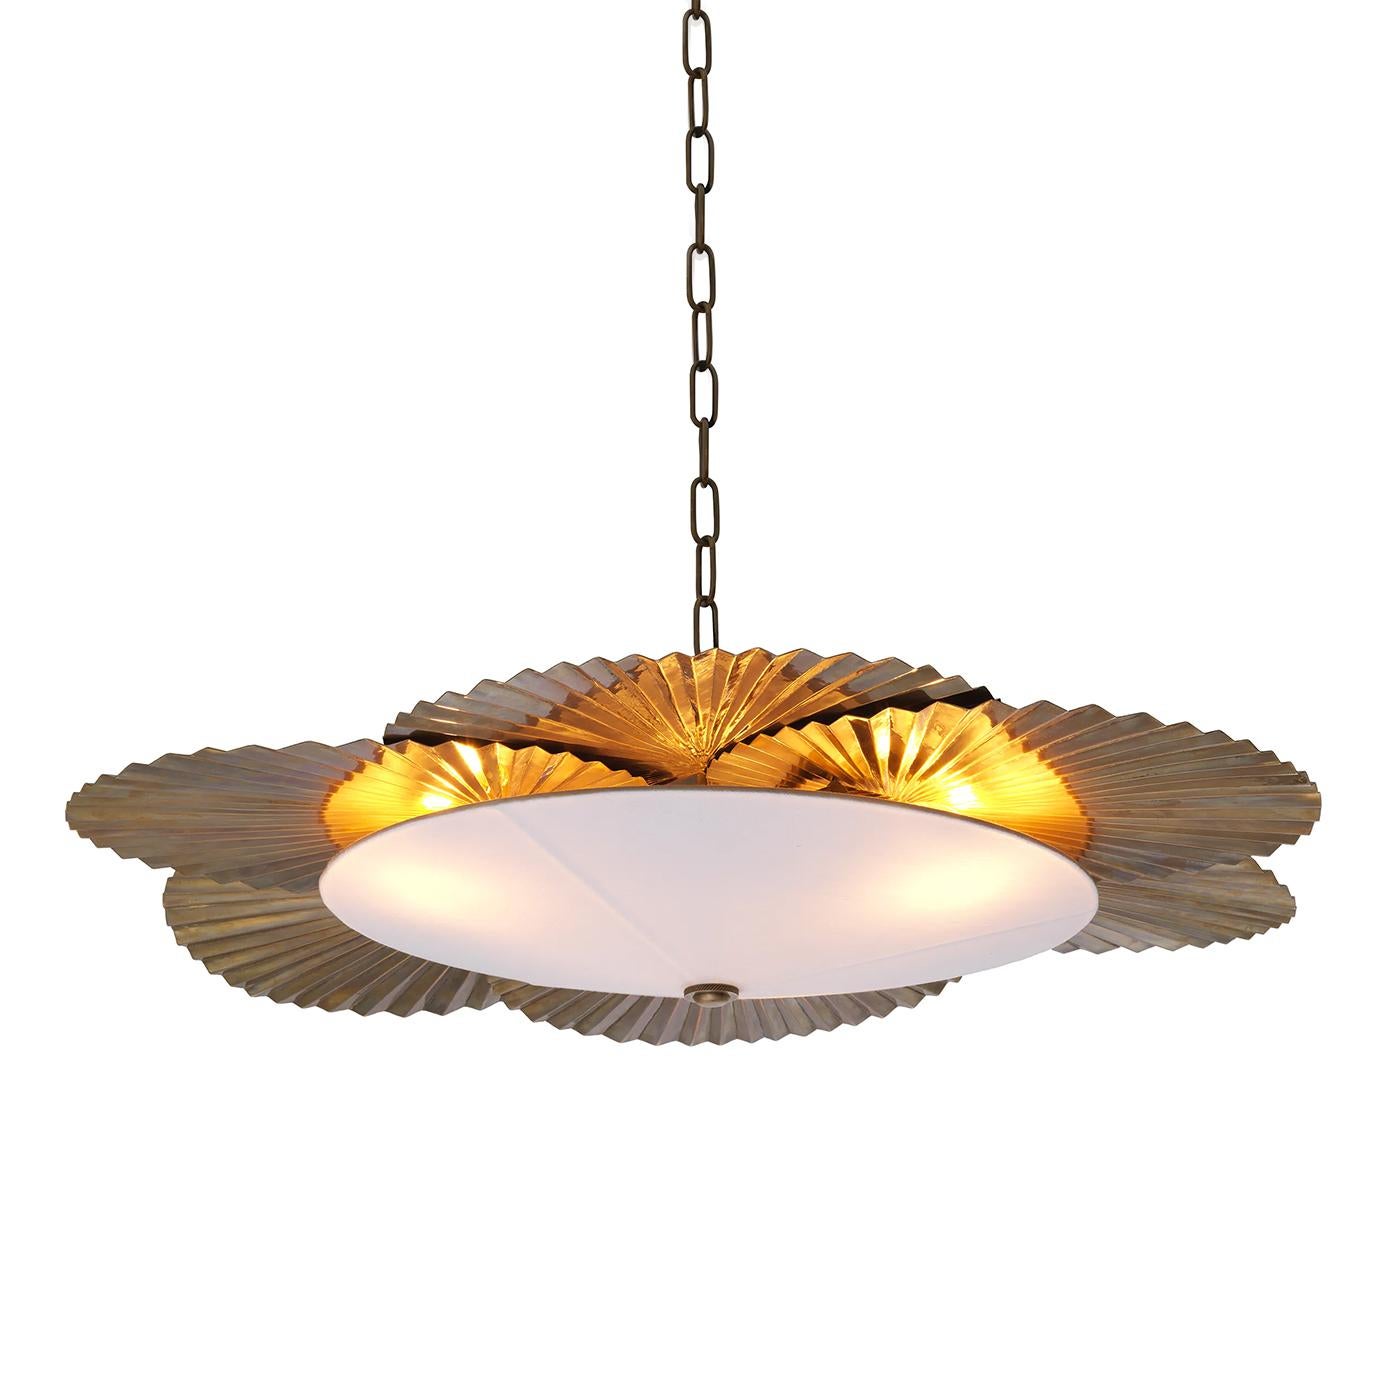 Suspension lotus brass with all structure in solid brass in
vintage finish, with round shade in linen. 3 Bulbs, lamp holder
type E14, max 25 watts, 220-240 volt. Bulbs not included.
Dimmable, dimmer not included. With 200cm hanging chain.